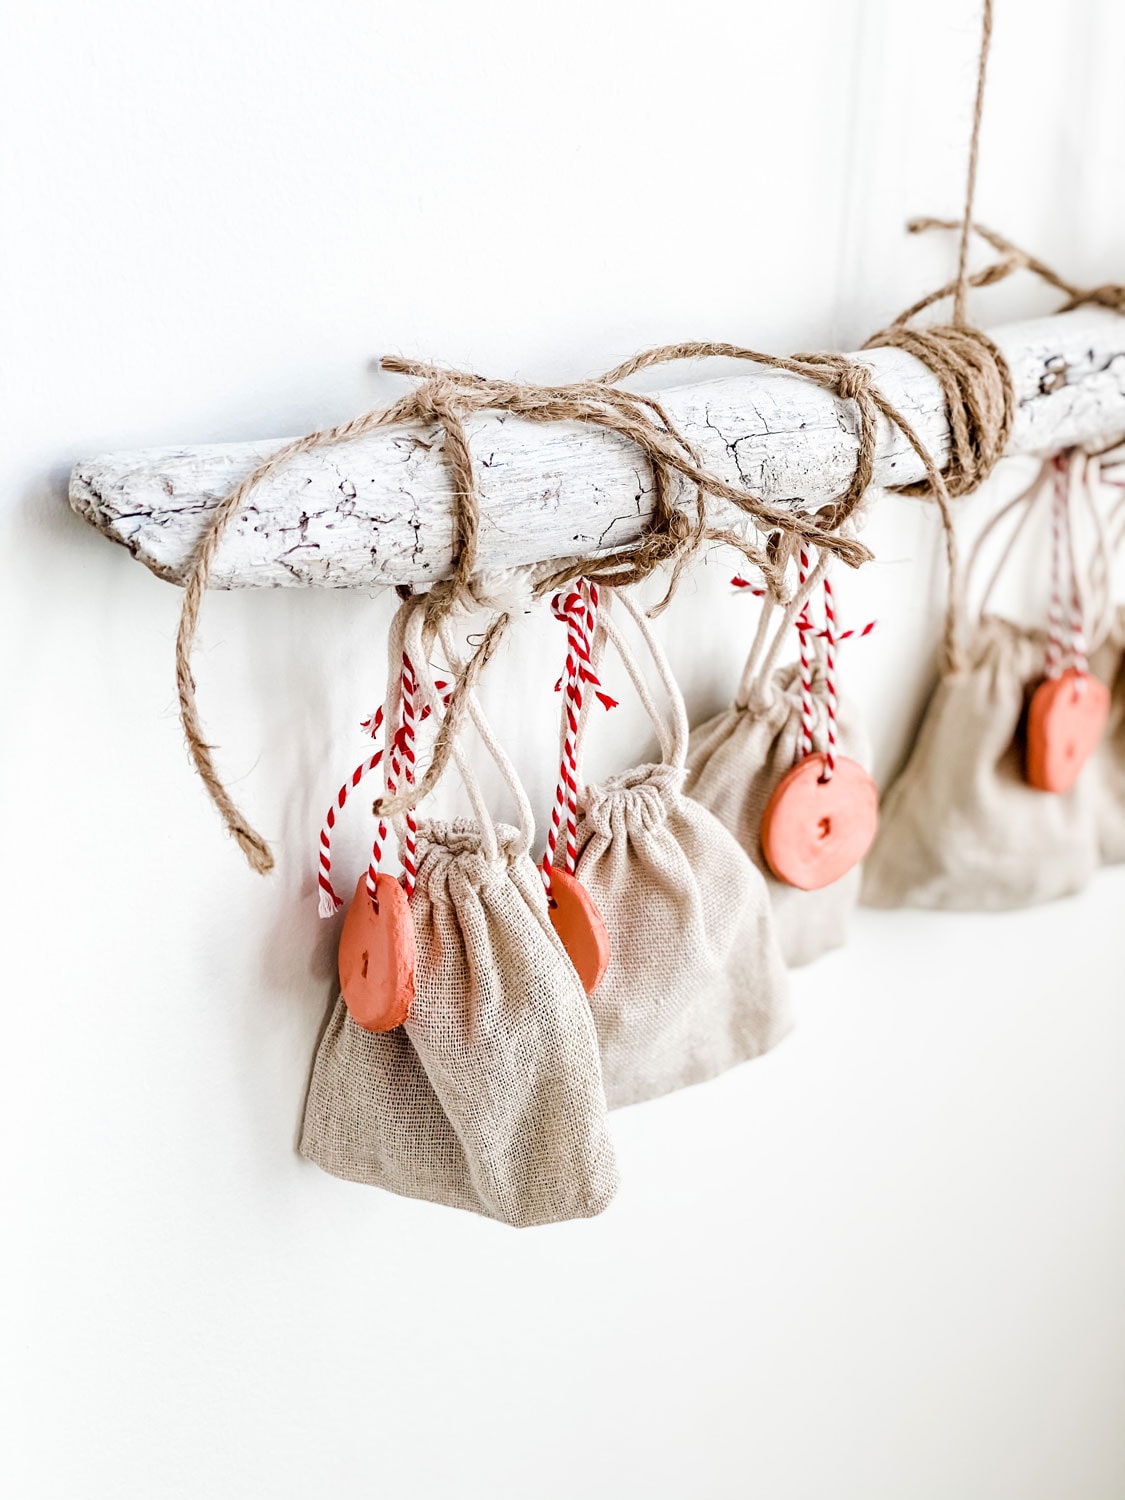 driftwood, greens, bags, clay tags advent calendar on white wall